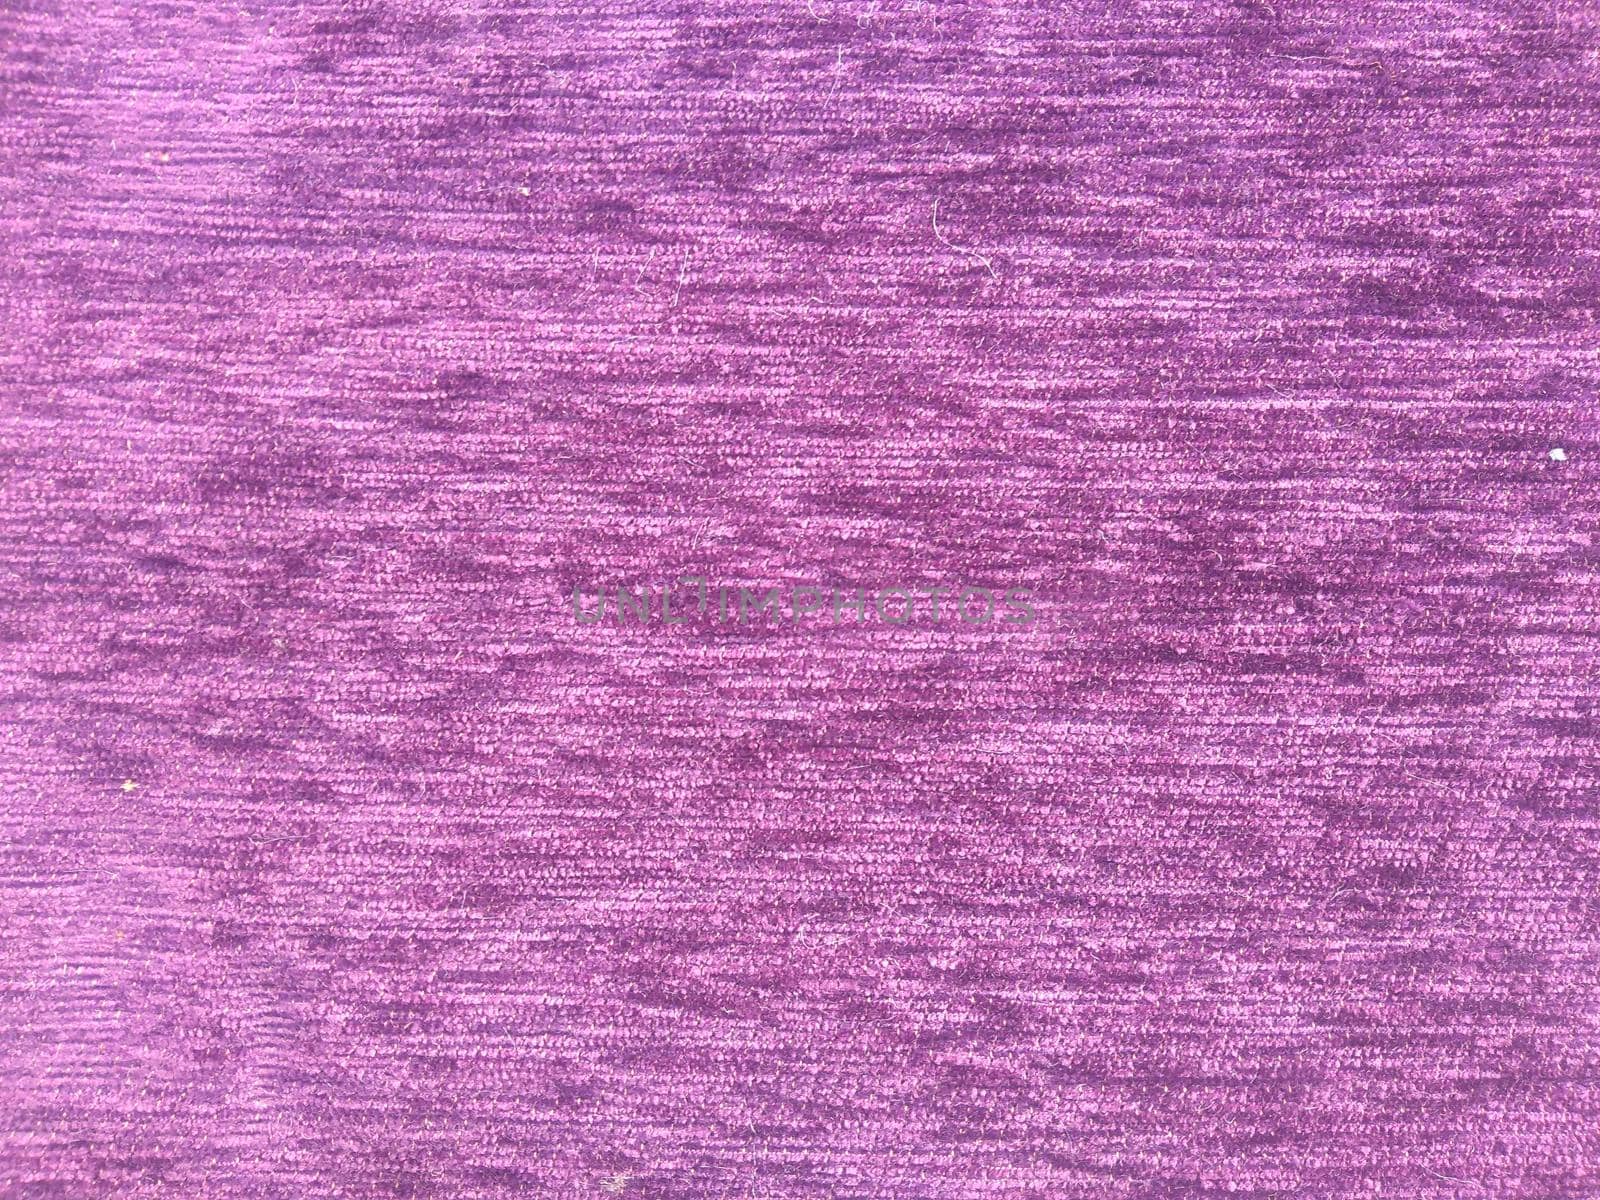 Fashionable texture fabric for interiors furniture manufacture and use.